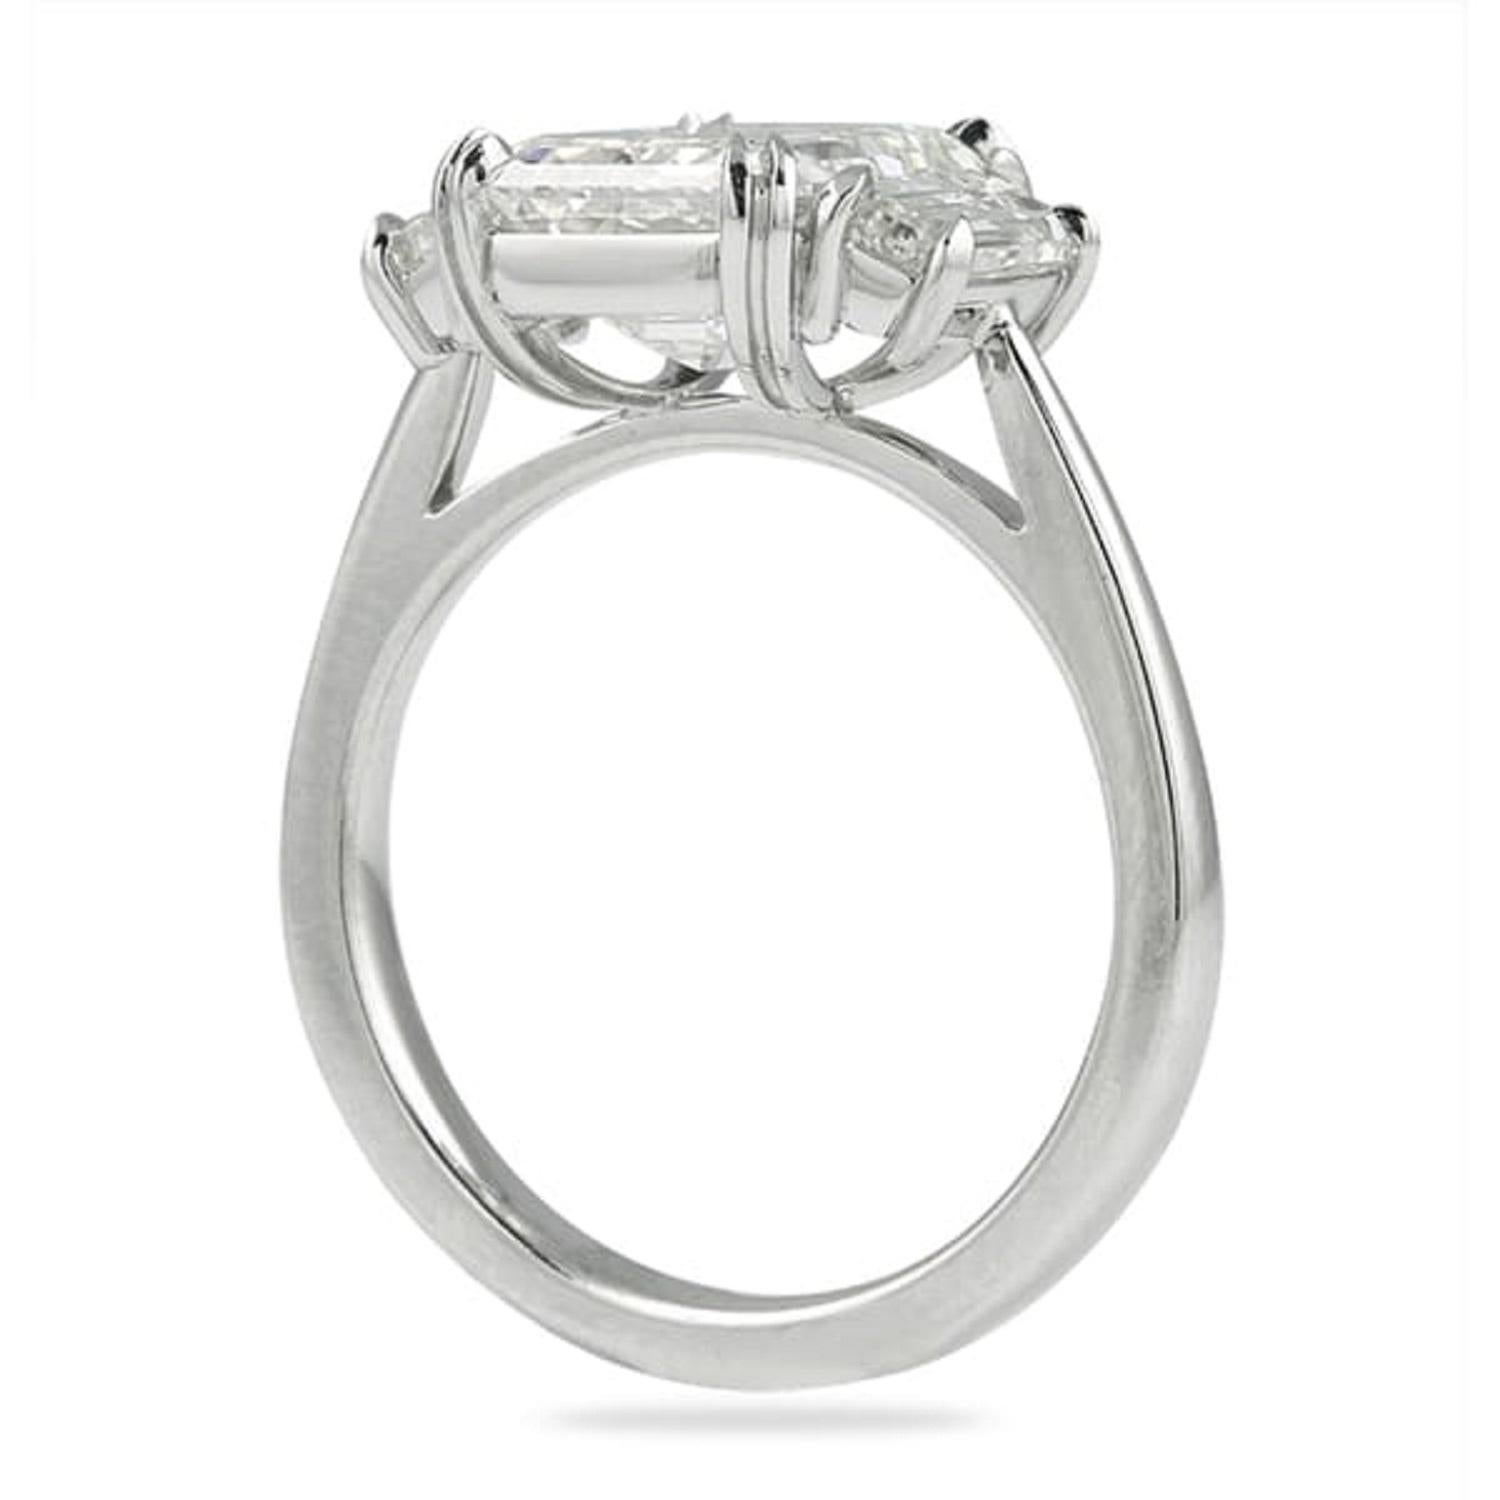 Contemporary Exceptional GIA Certified 4.02 Carat Excellent Cut Emerald Cut Diamond Ring For Sale